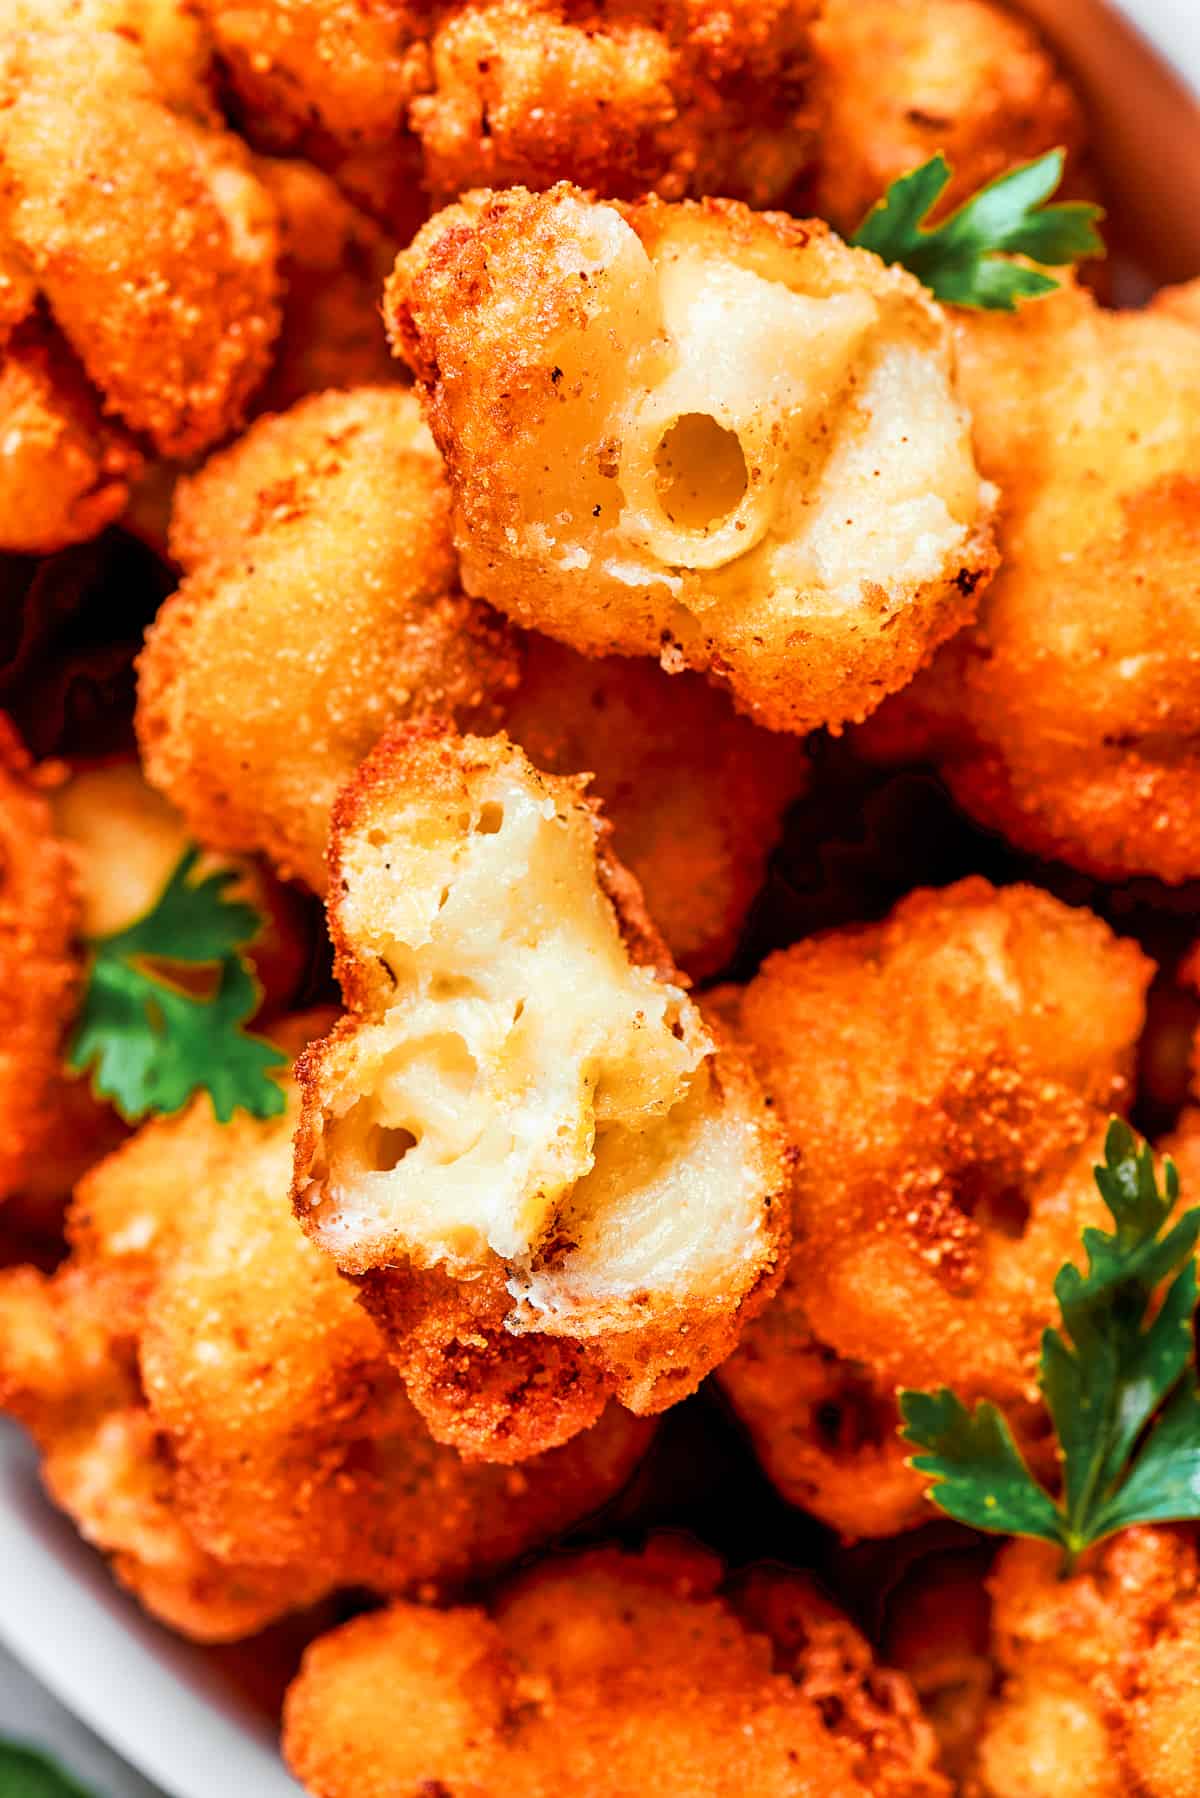 Close-up image of fried mac and cheese bites cut in half to showcase its texture inside.